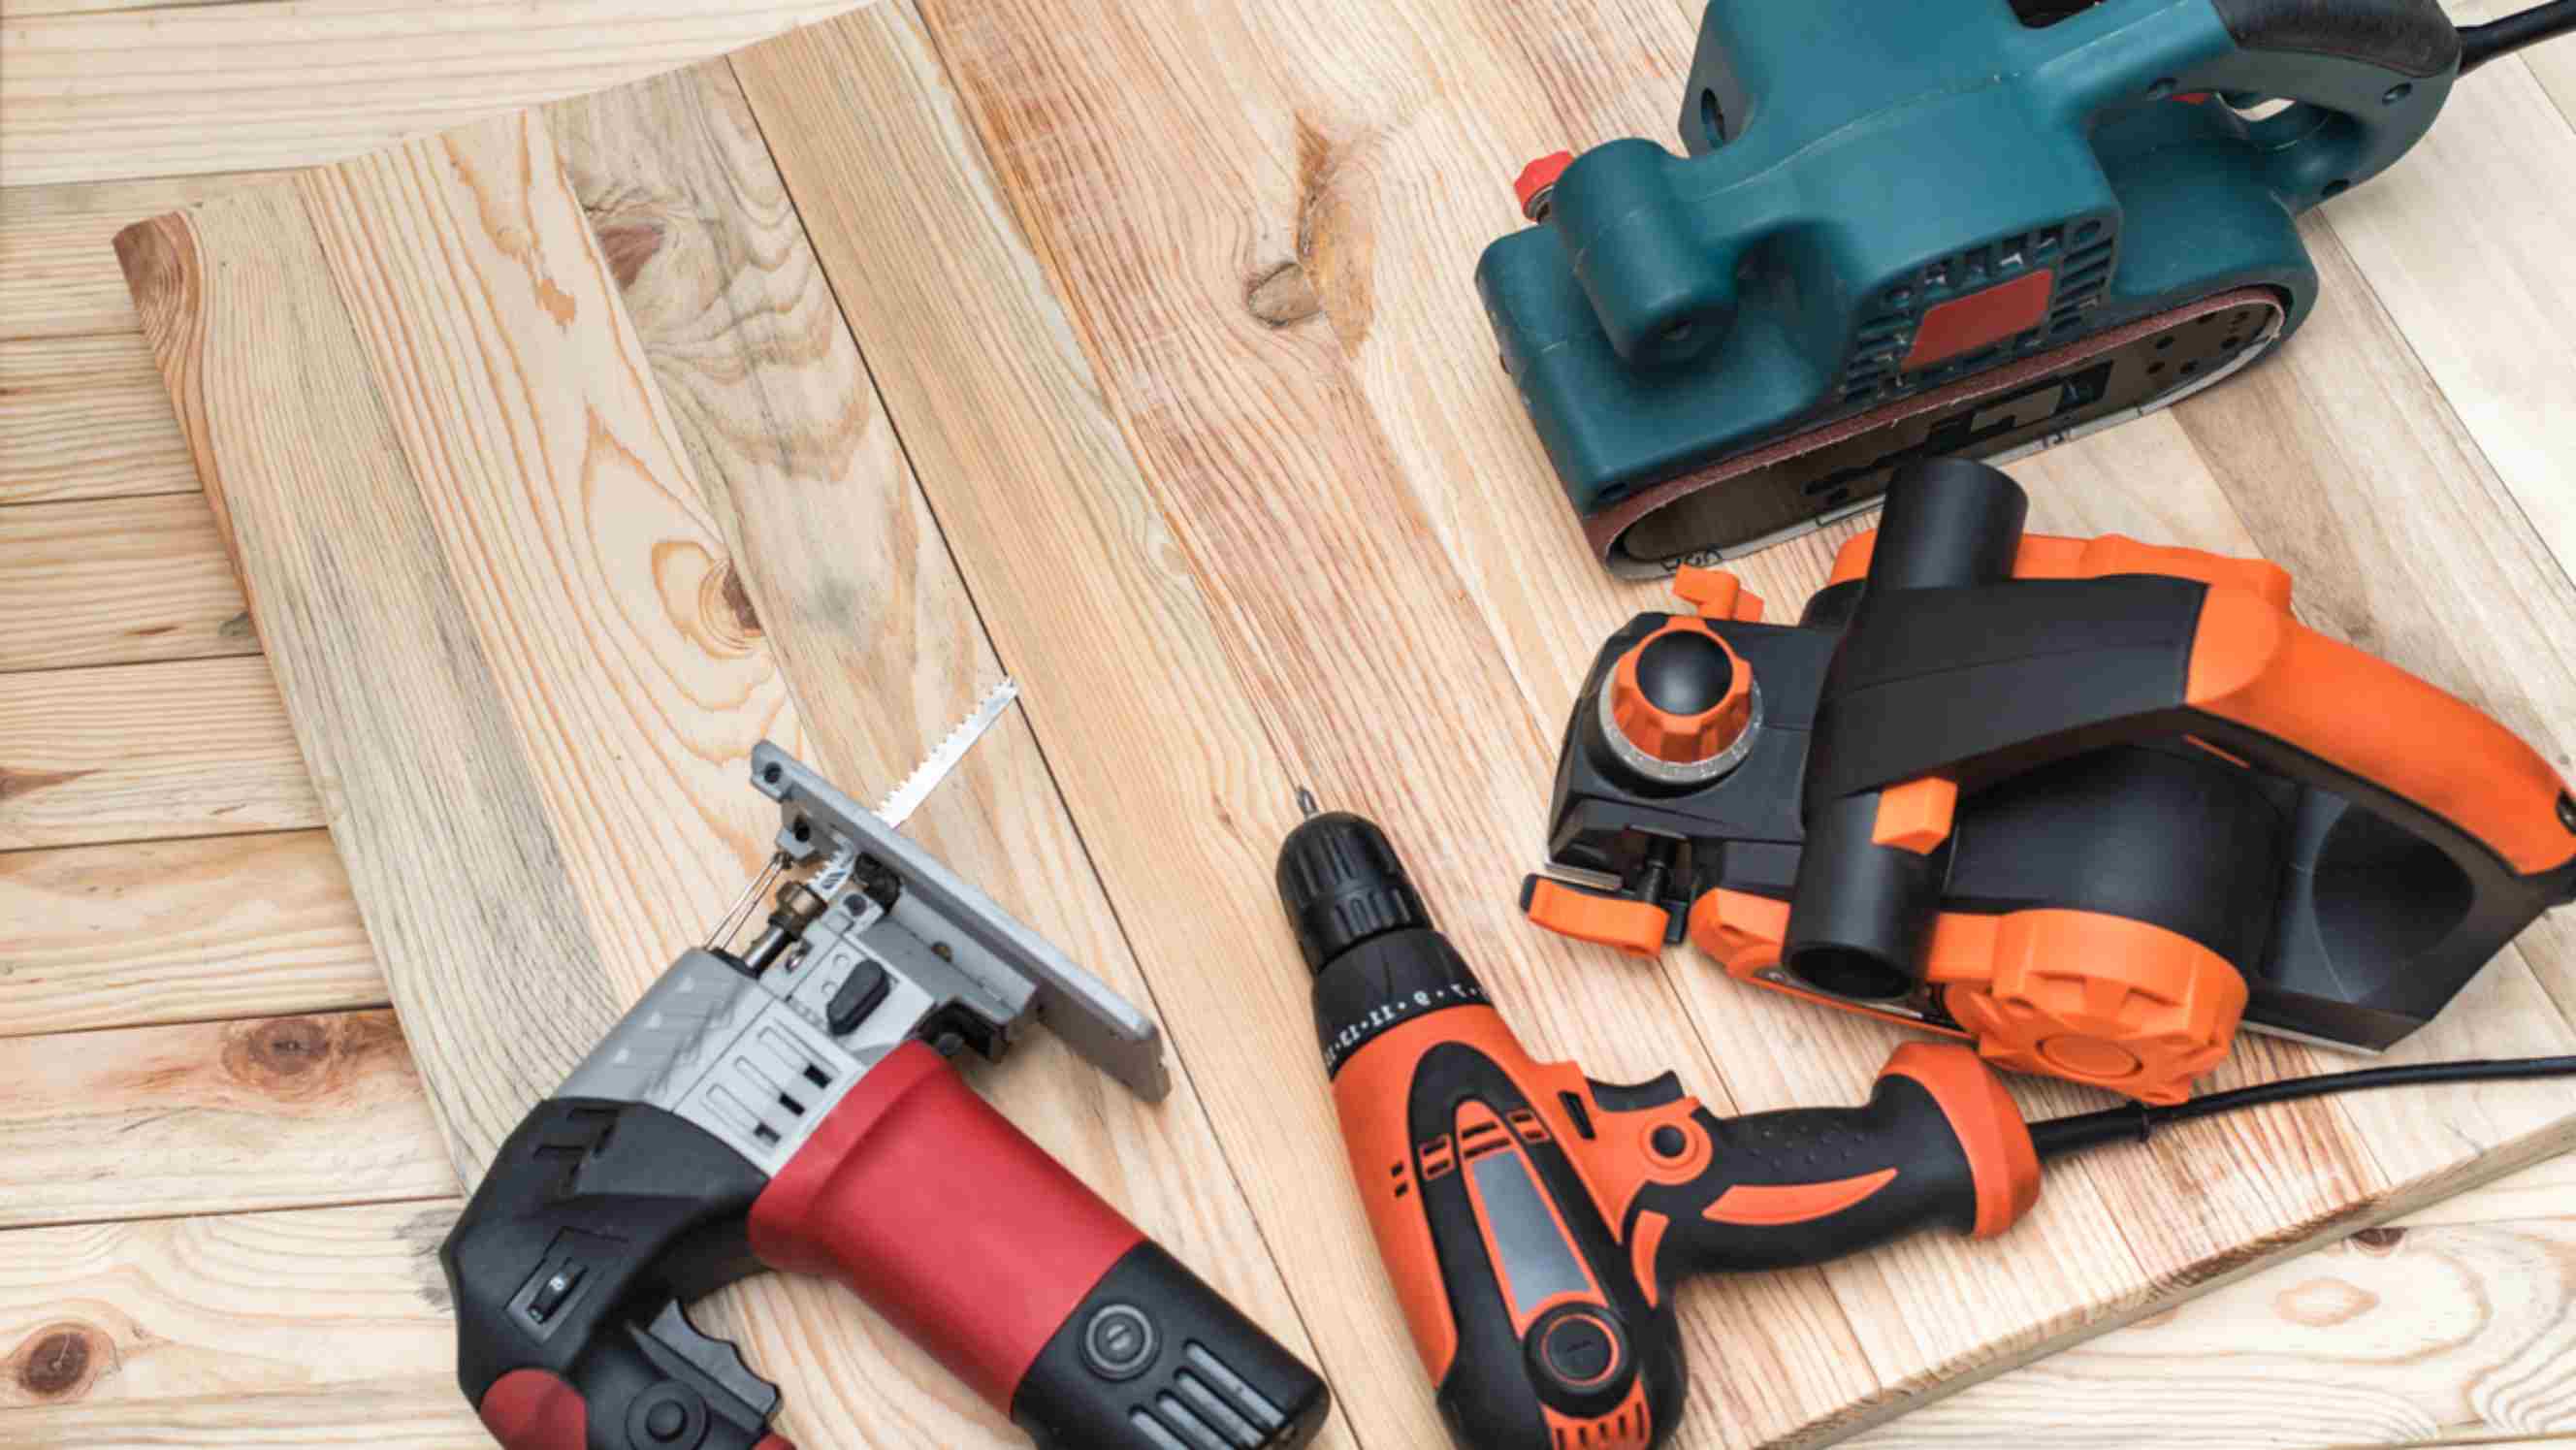 Impact driver vs impact wrench - Set of handheld woodworking power tools on a light wooden background